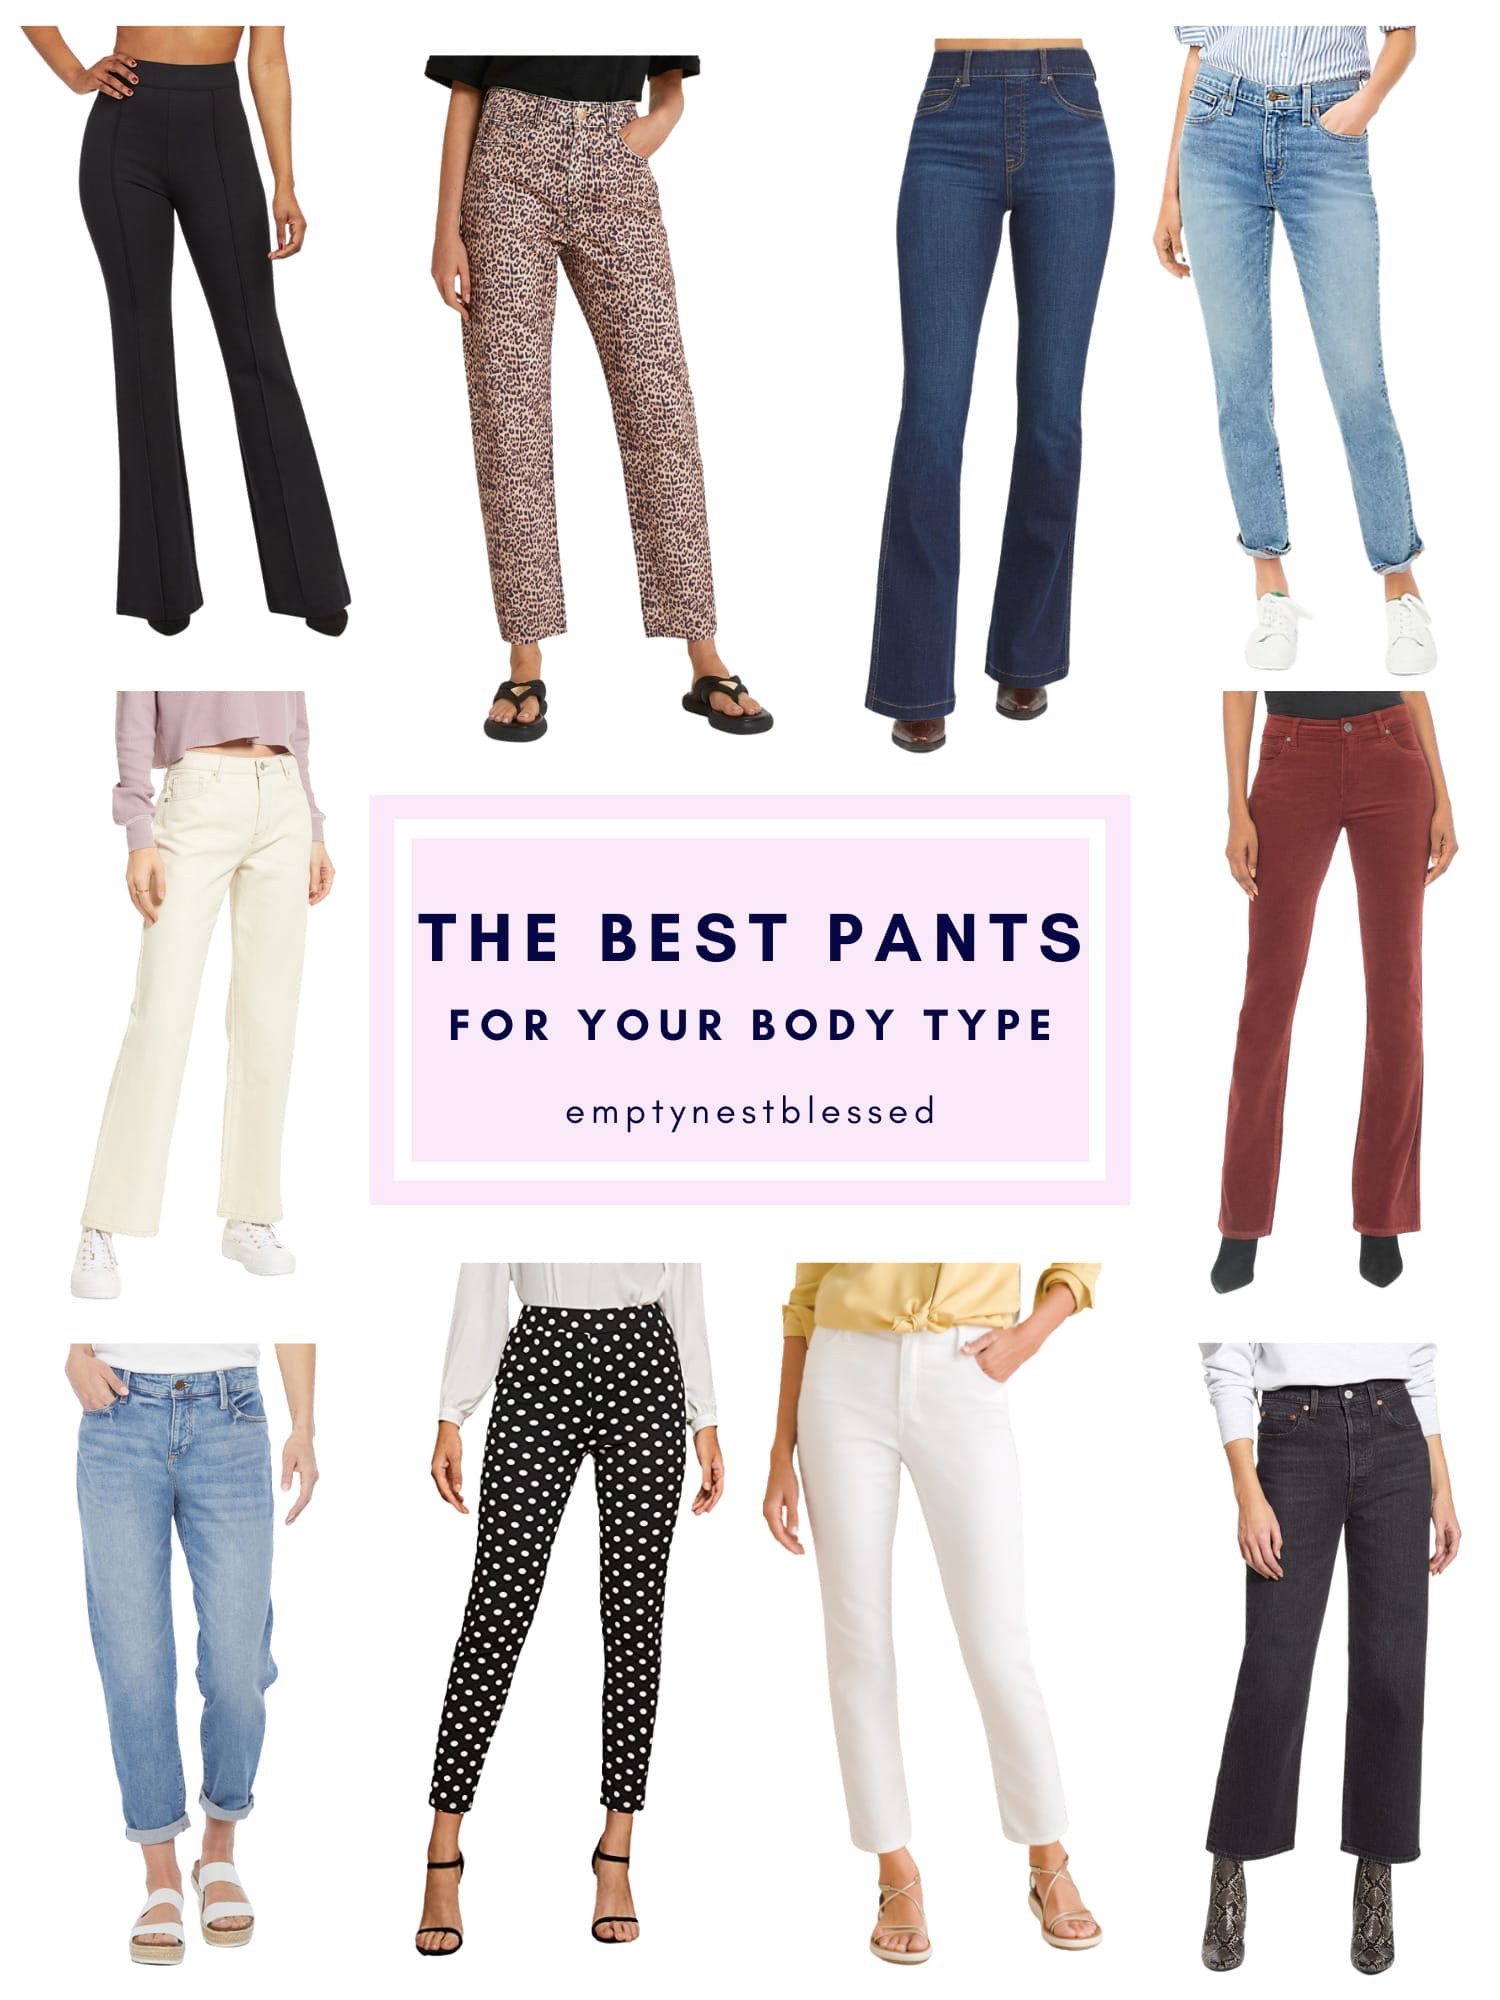 5 ways to wear light pink jeans  Light pink jeans, Pink jeans